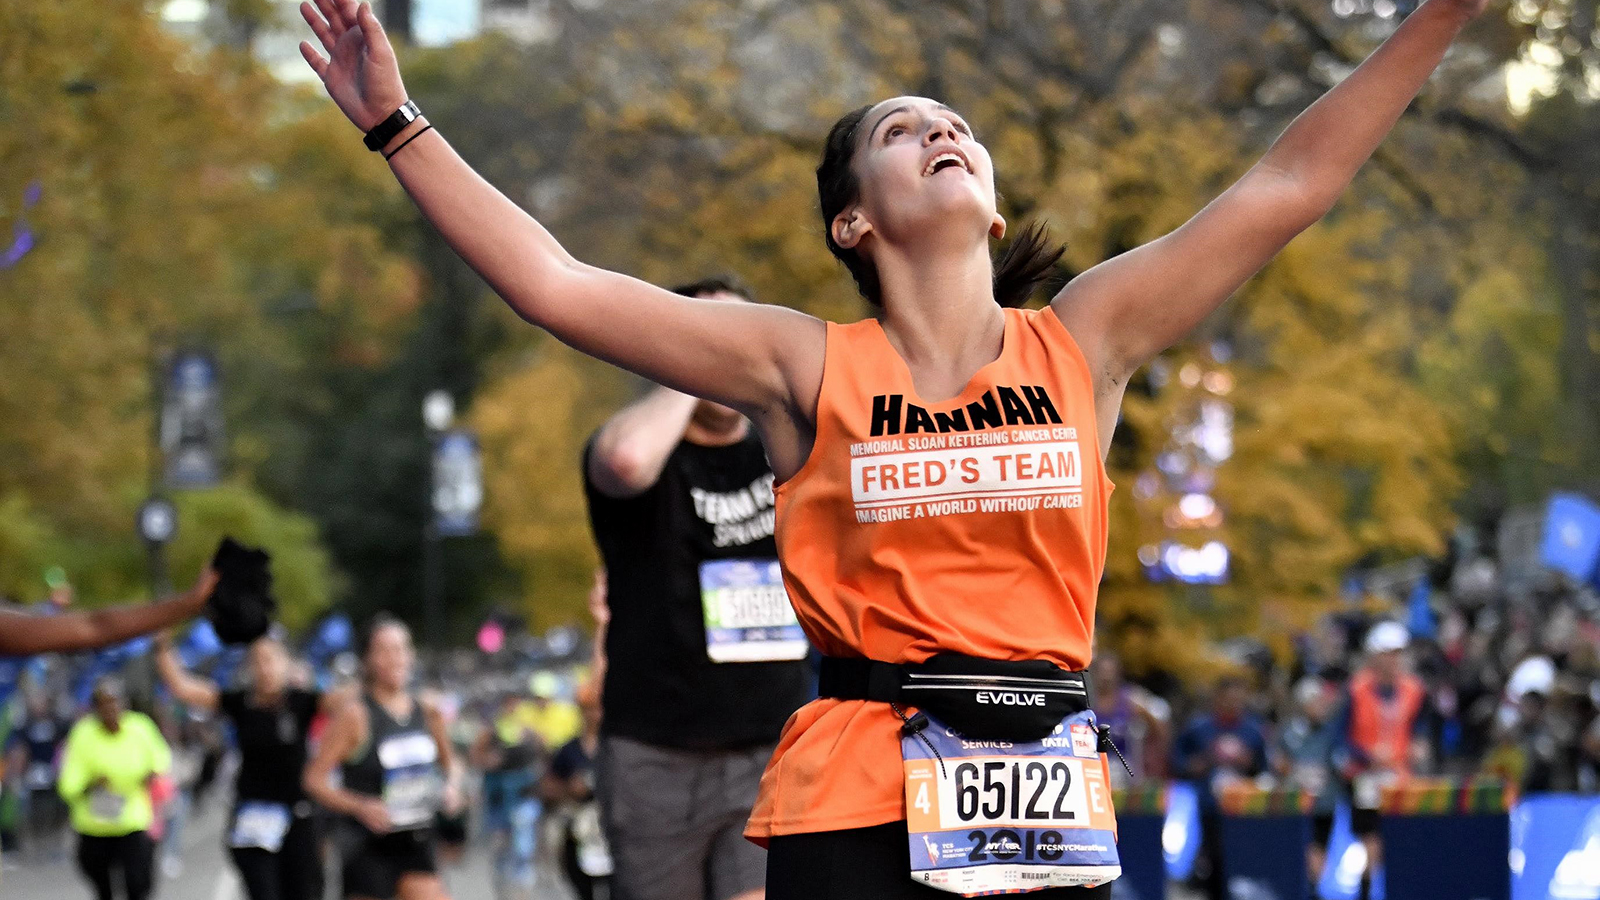 Tips for Getting the Perfect Race-Day Photo